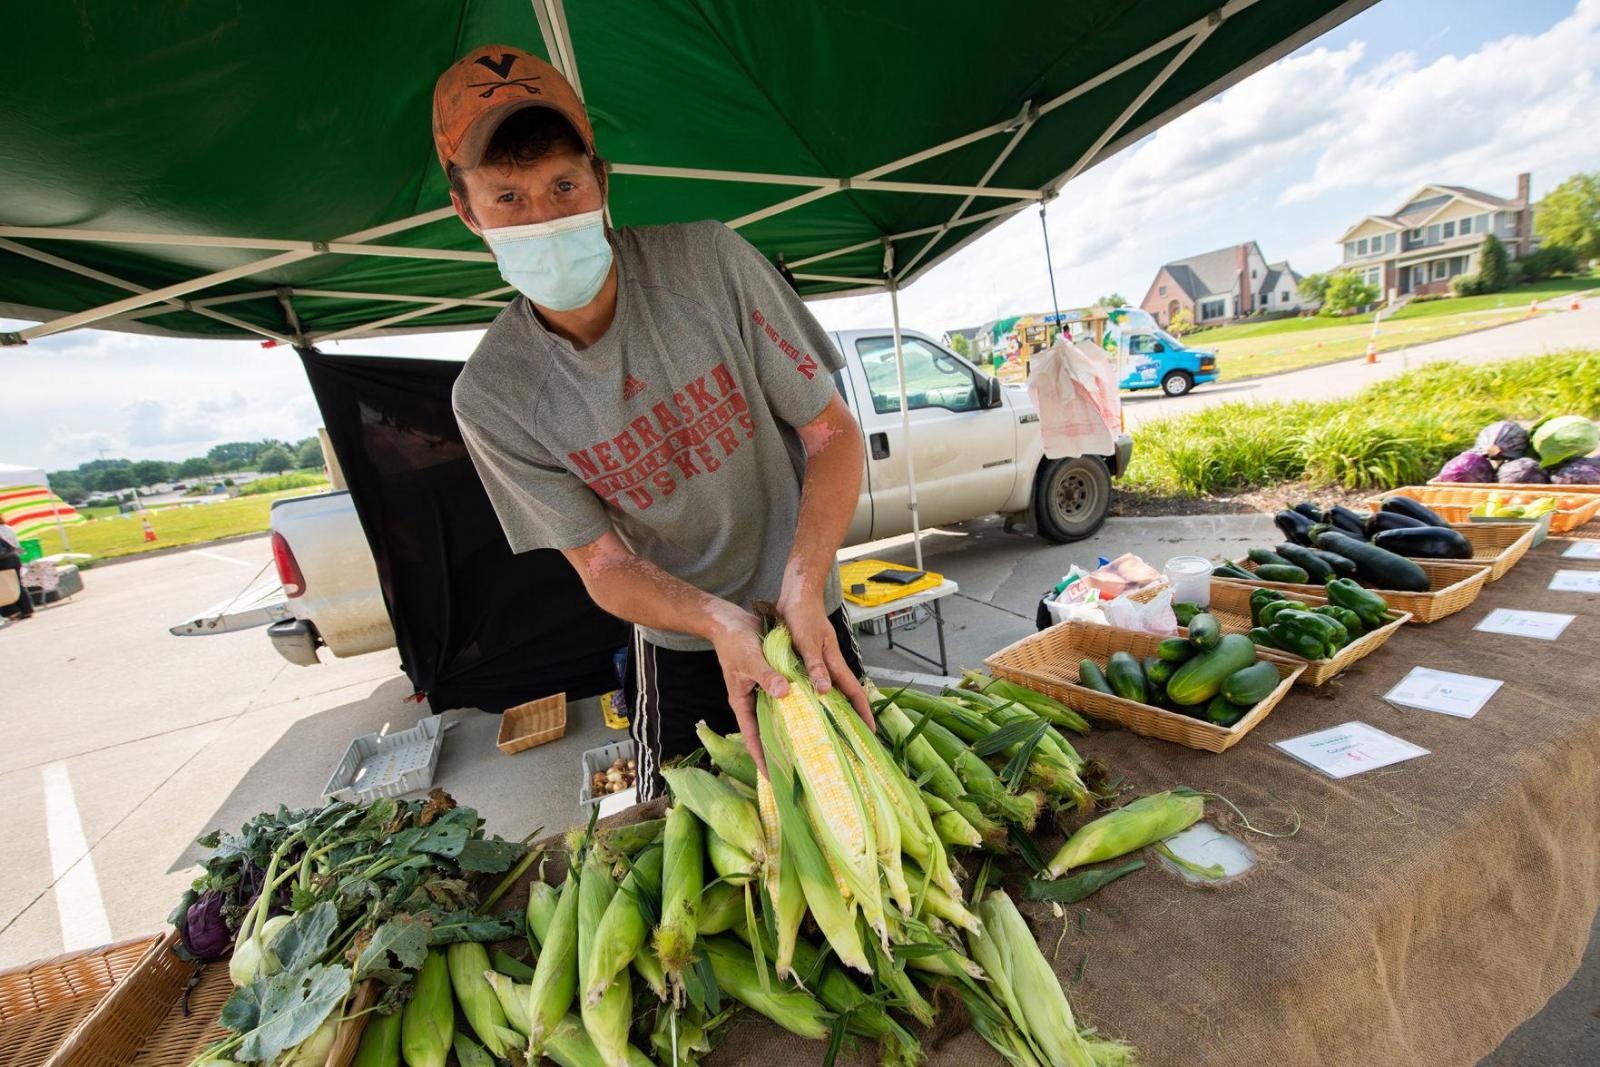 Man selling sweet corn at a Farmer's Market booth.